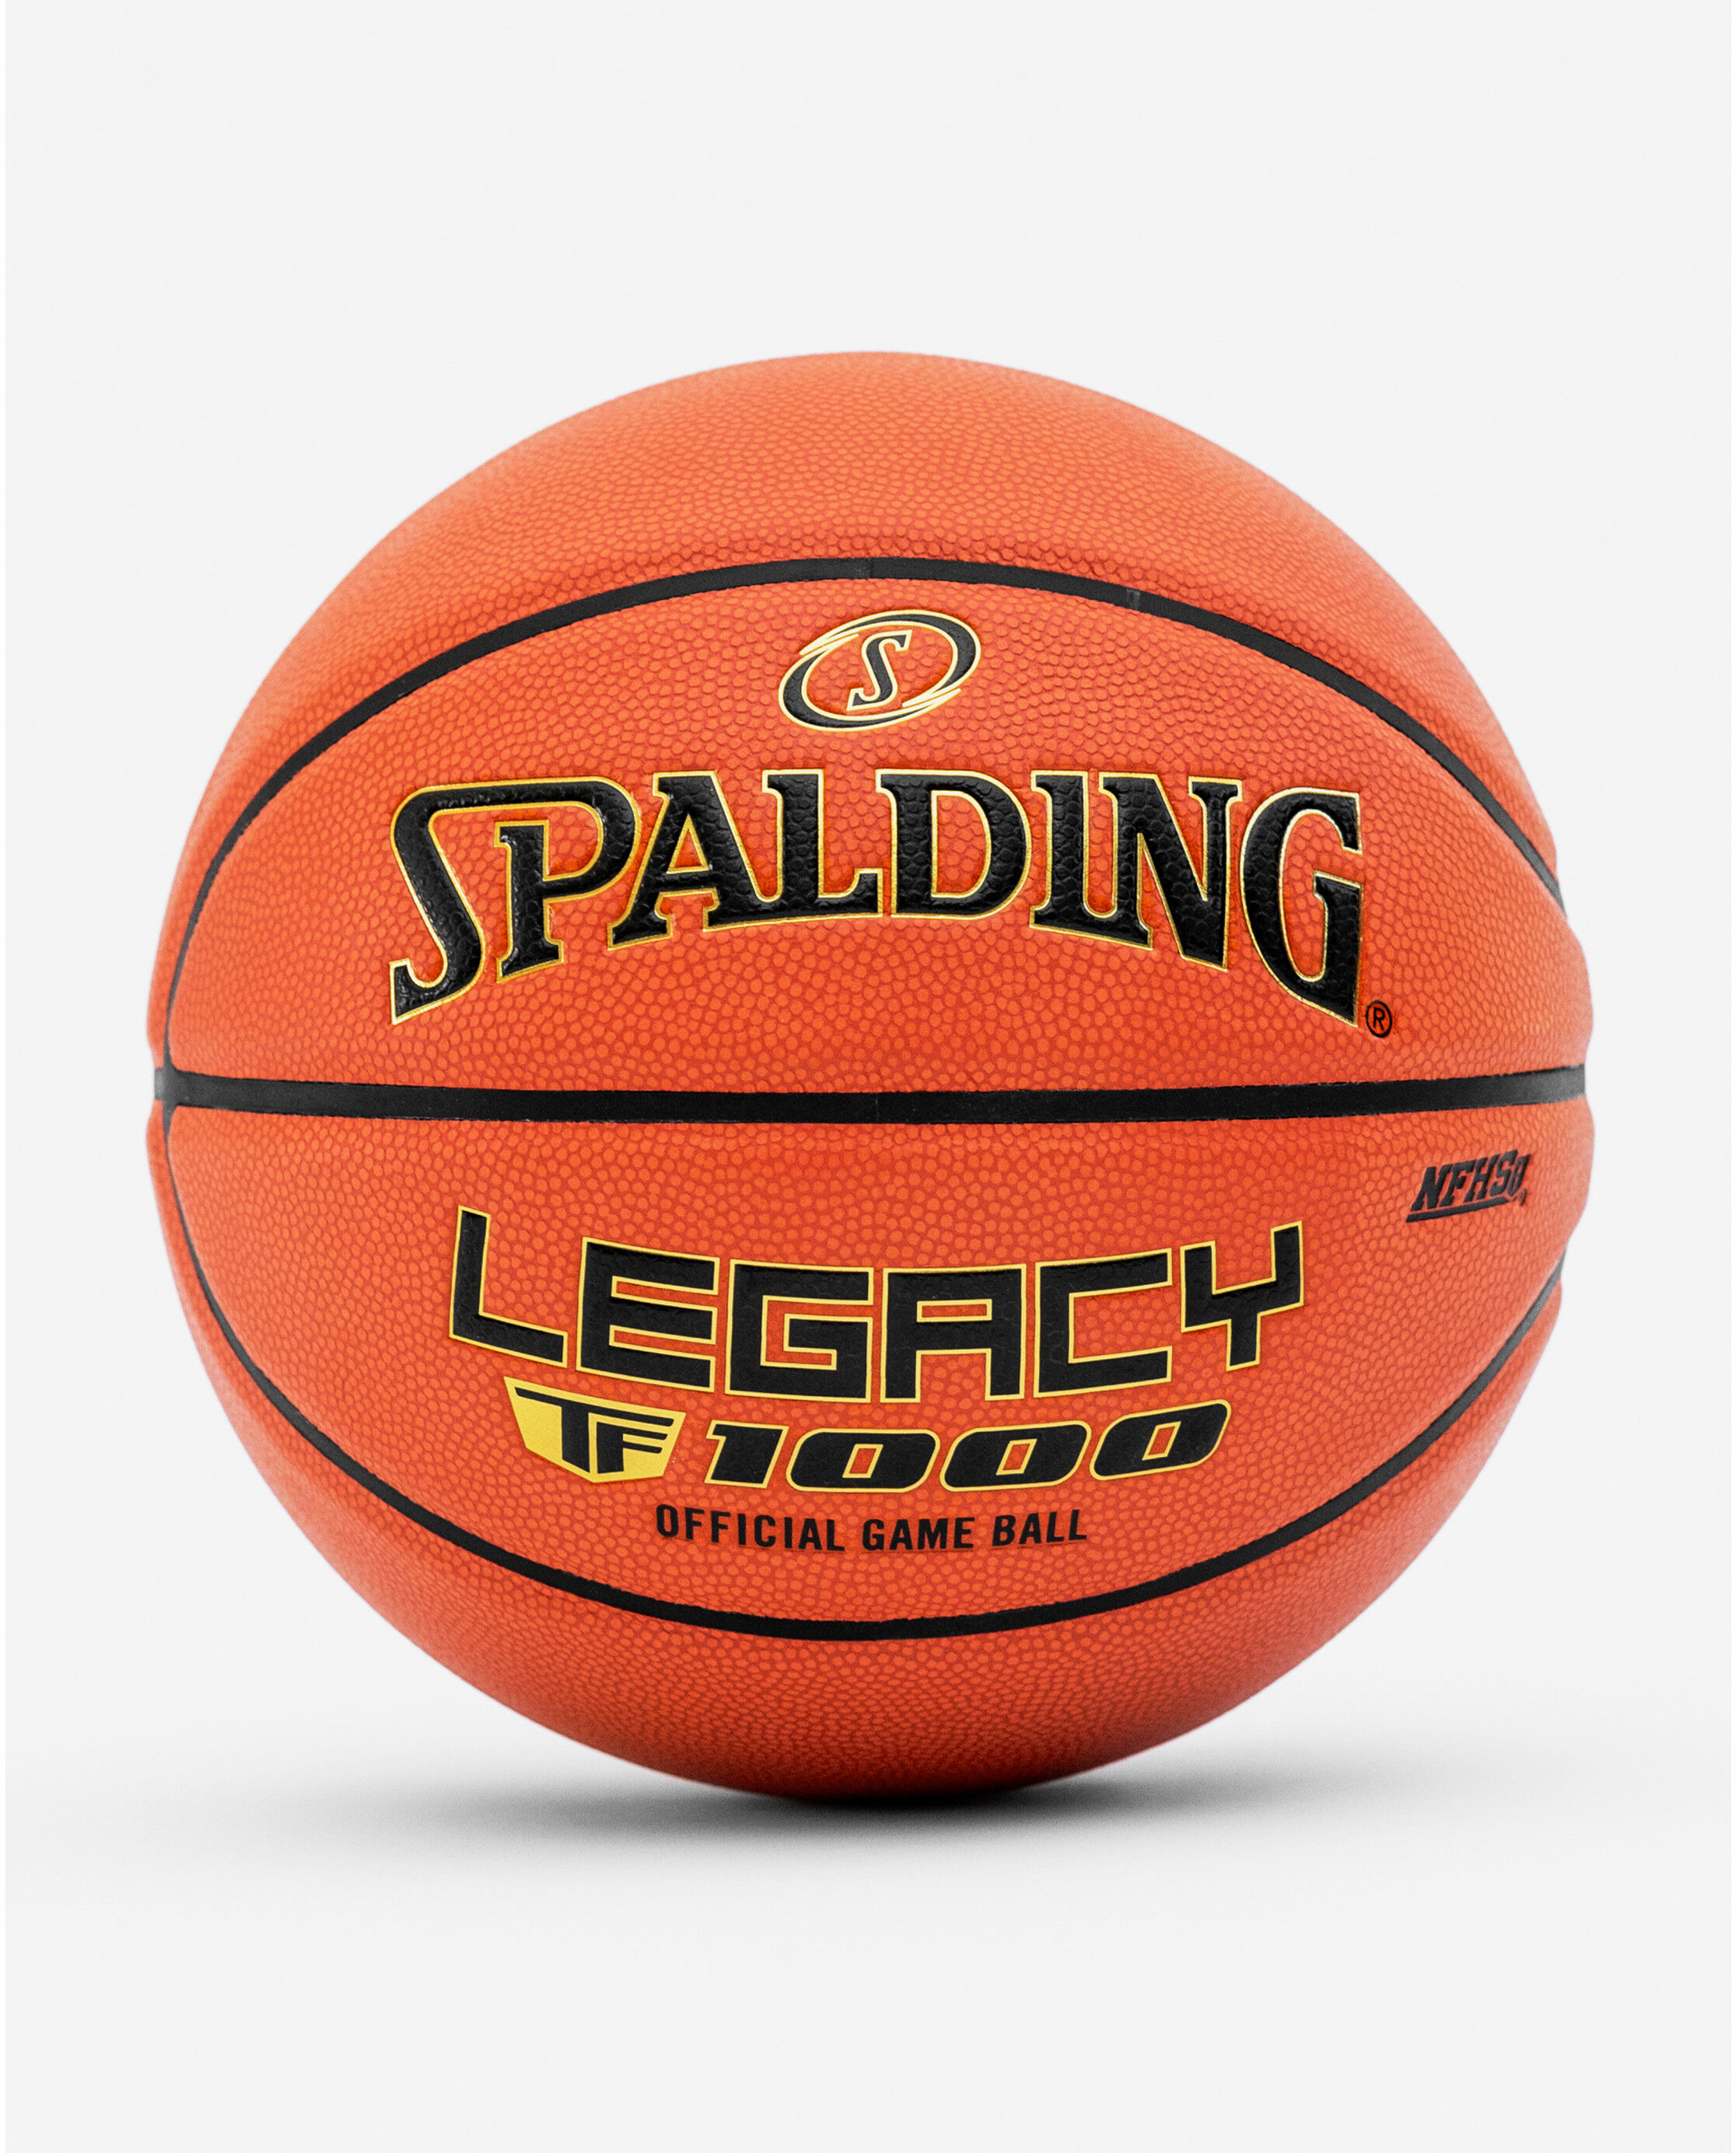 SPALDING TF1000 CLASSIC  BASKETBALL OFFICIAL  SIZE 29.5" CIRCUMFERENCE 